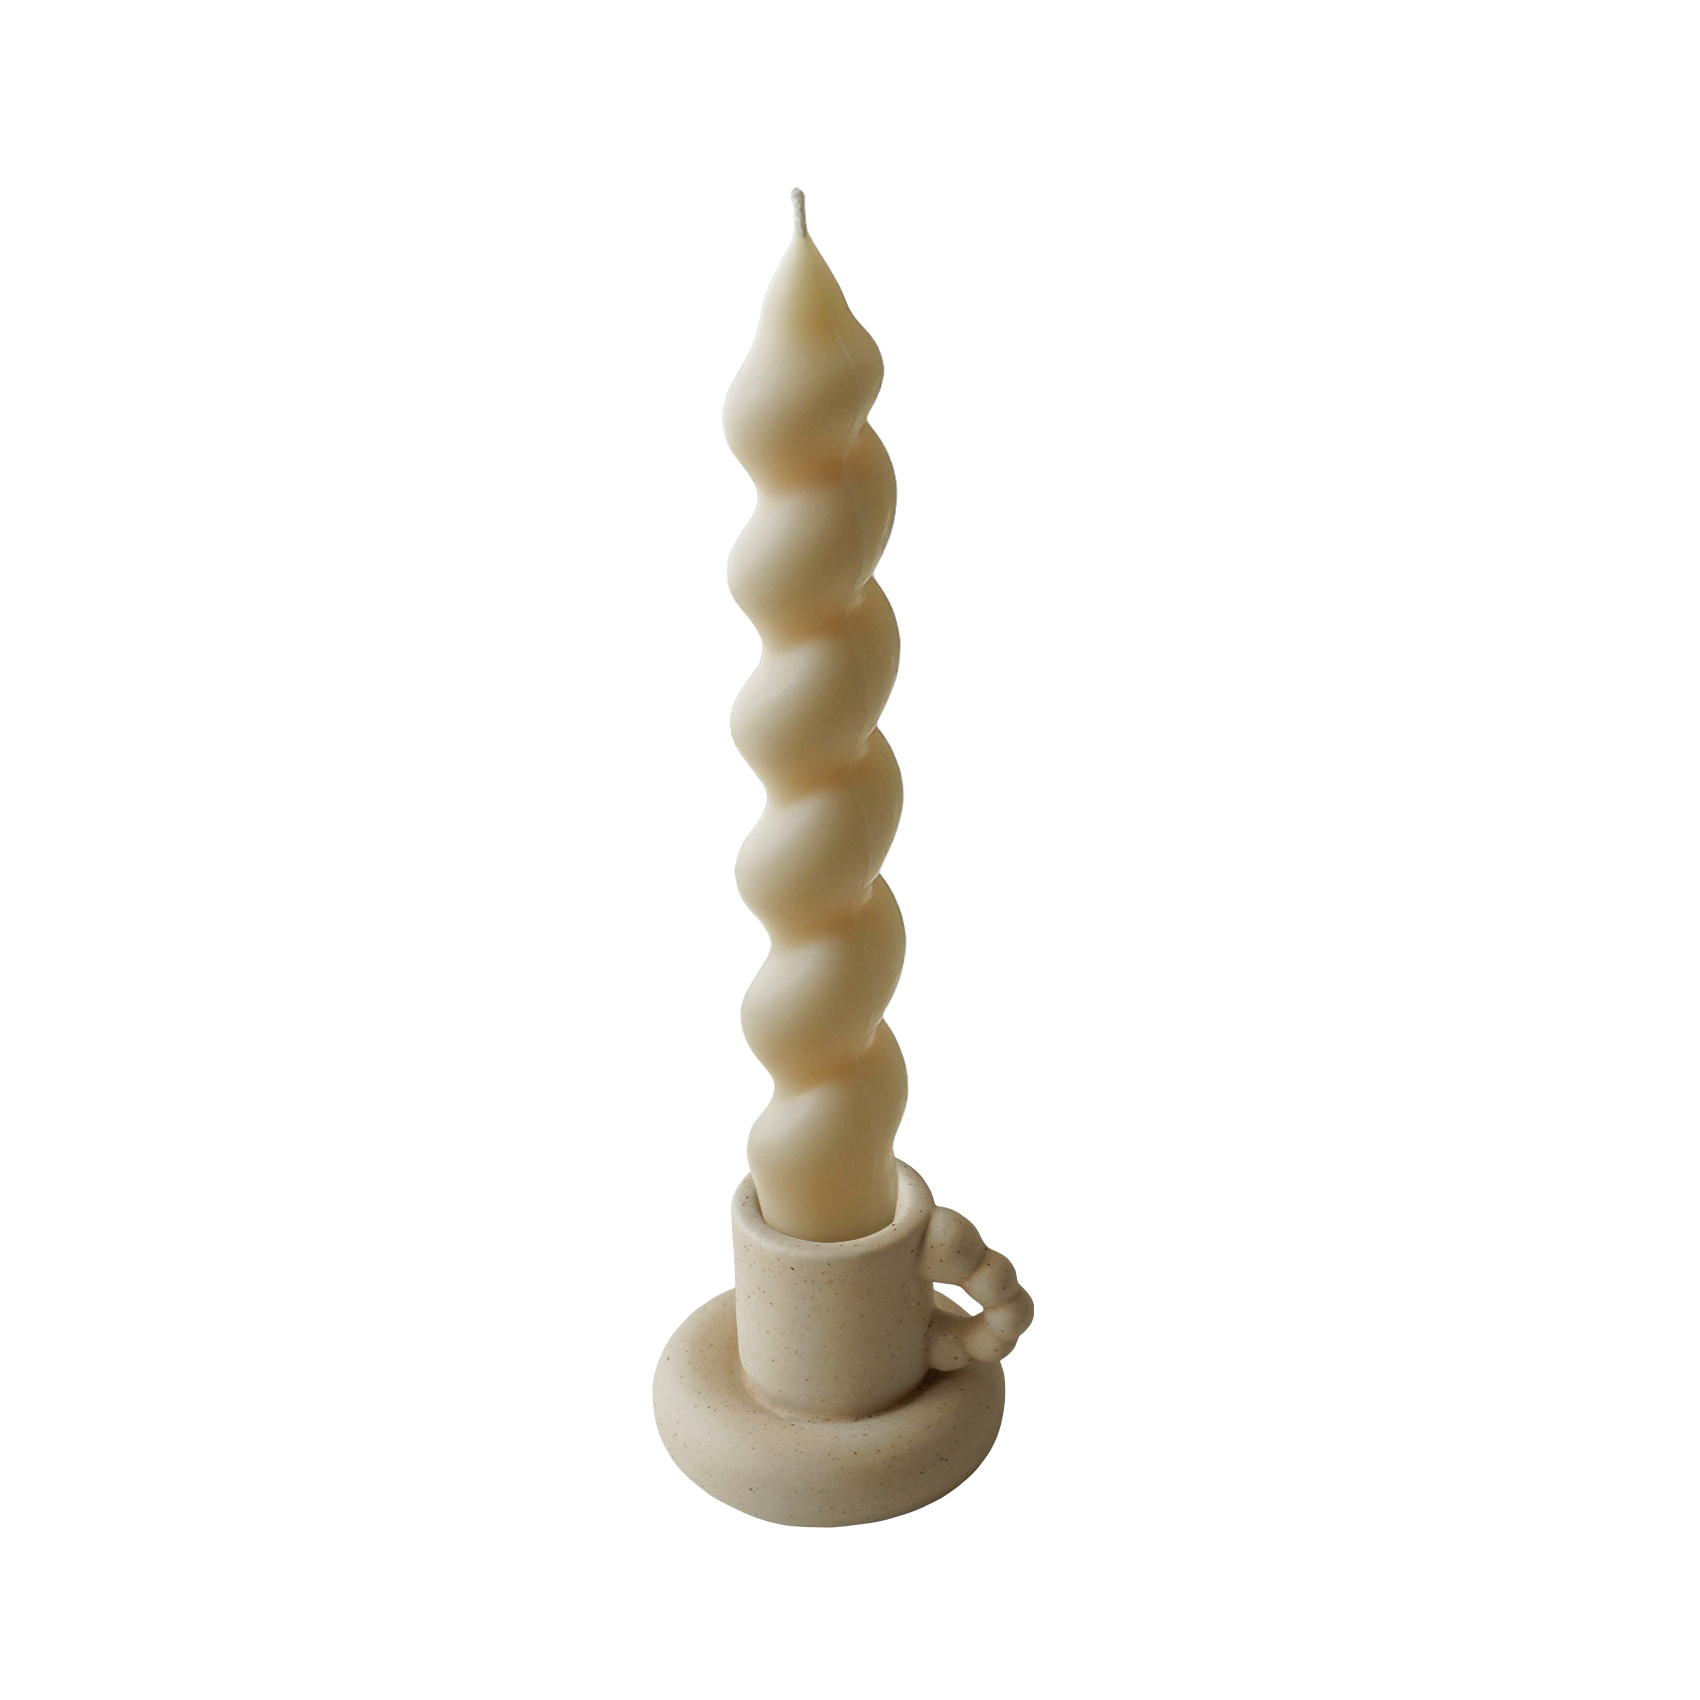 wavy spiral taper candle in a ceramic mug candle holder